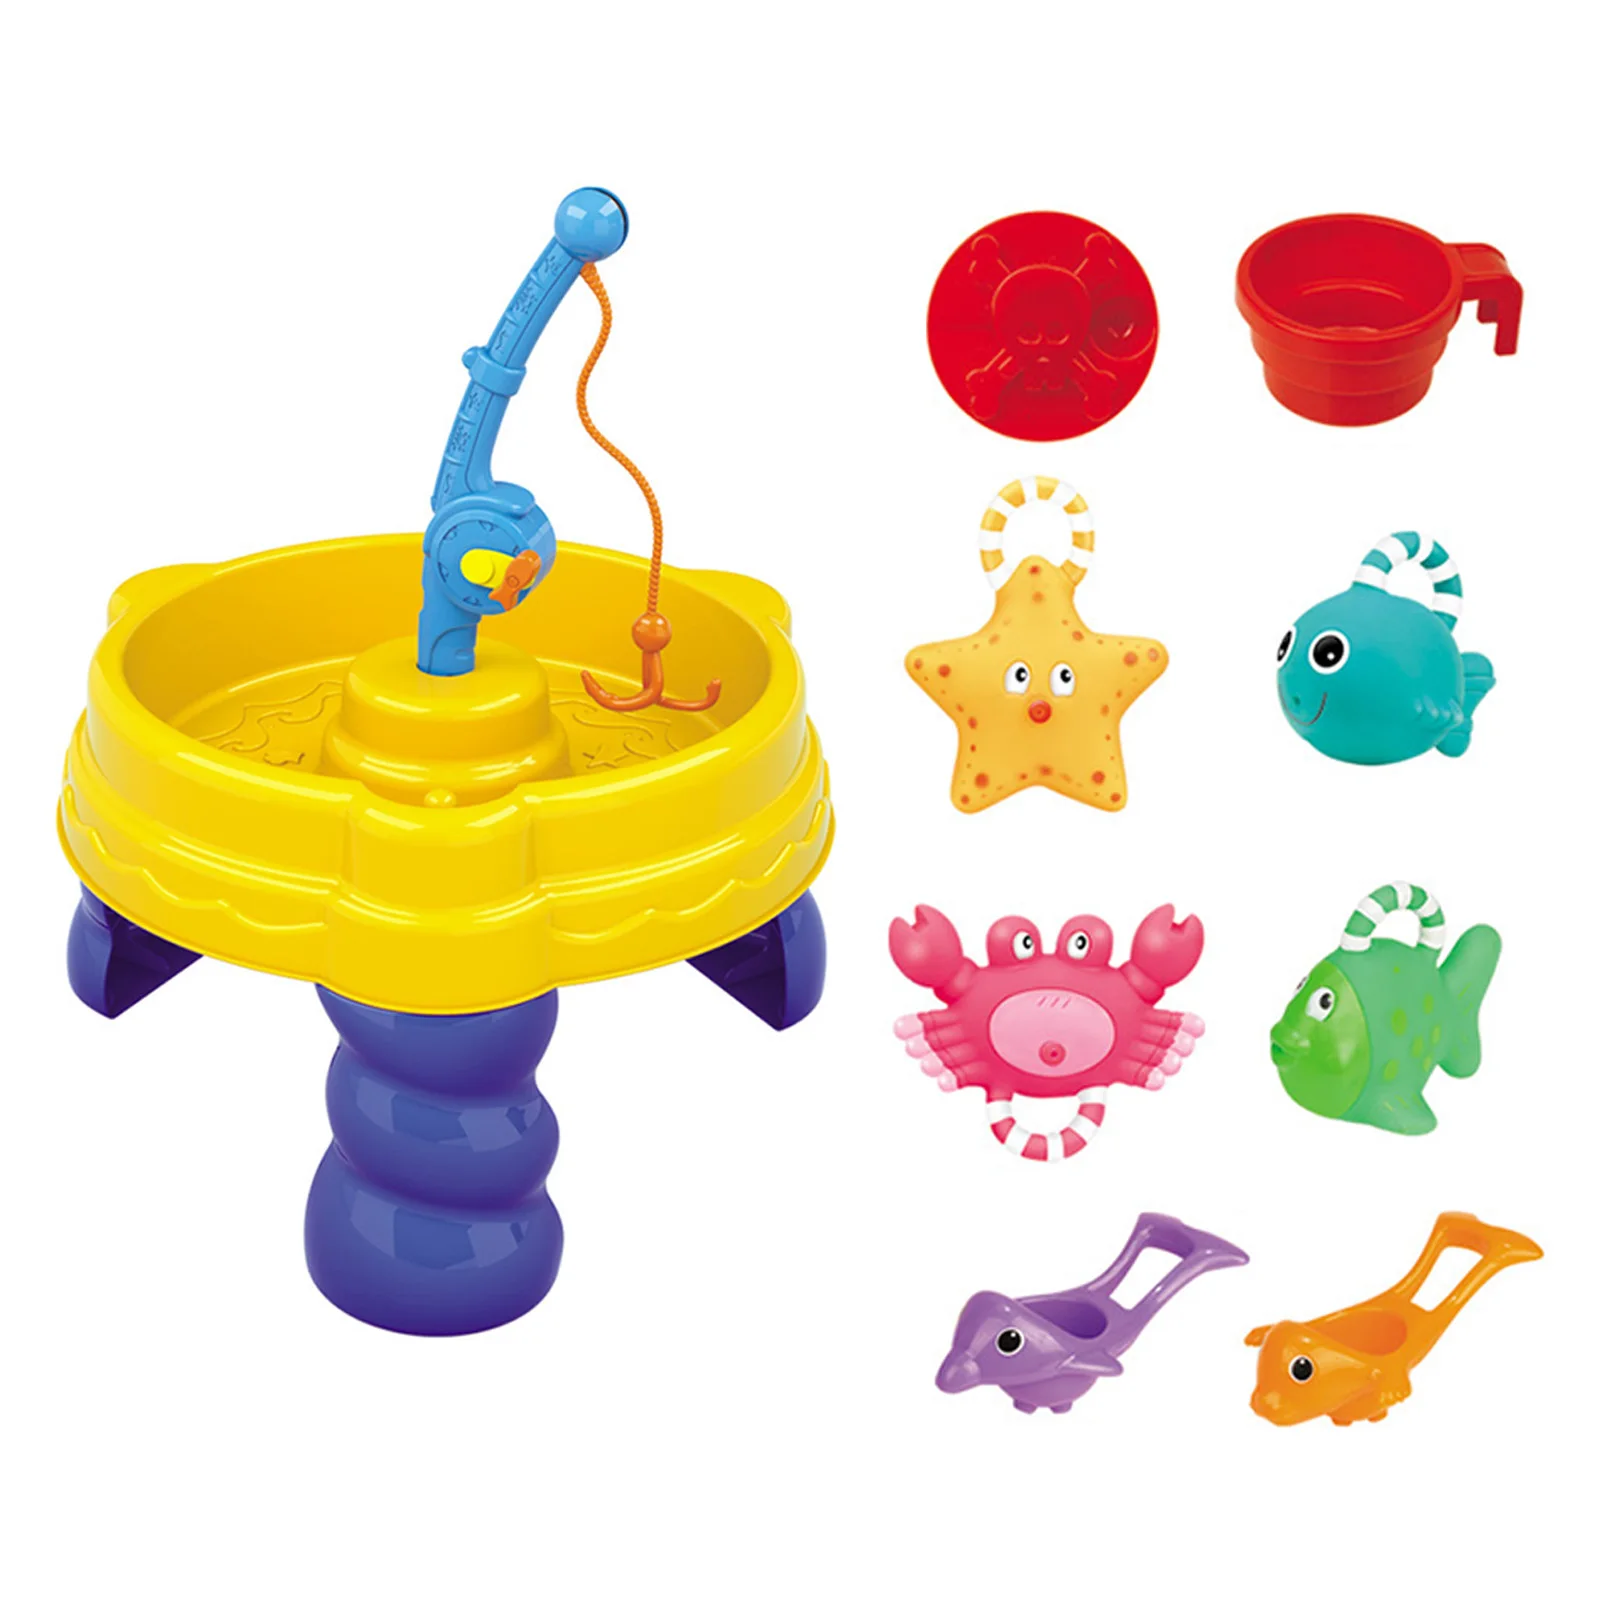 13PCS New Summer Beach Sand Toy Set Beach Water Sand Table With Other Accessories Summer Toy For Beach Play Sand Water Toys